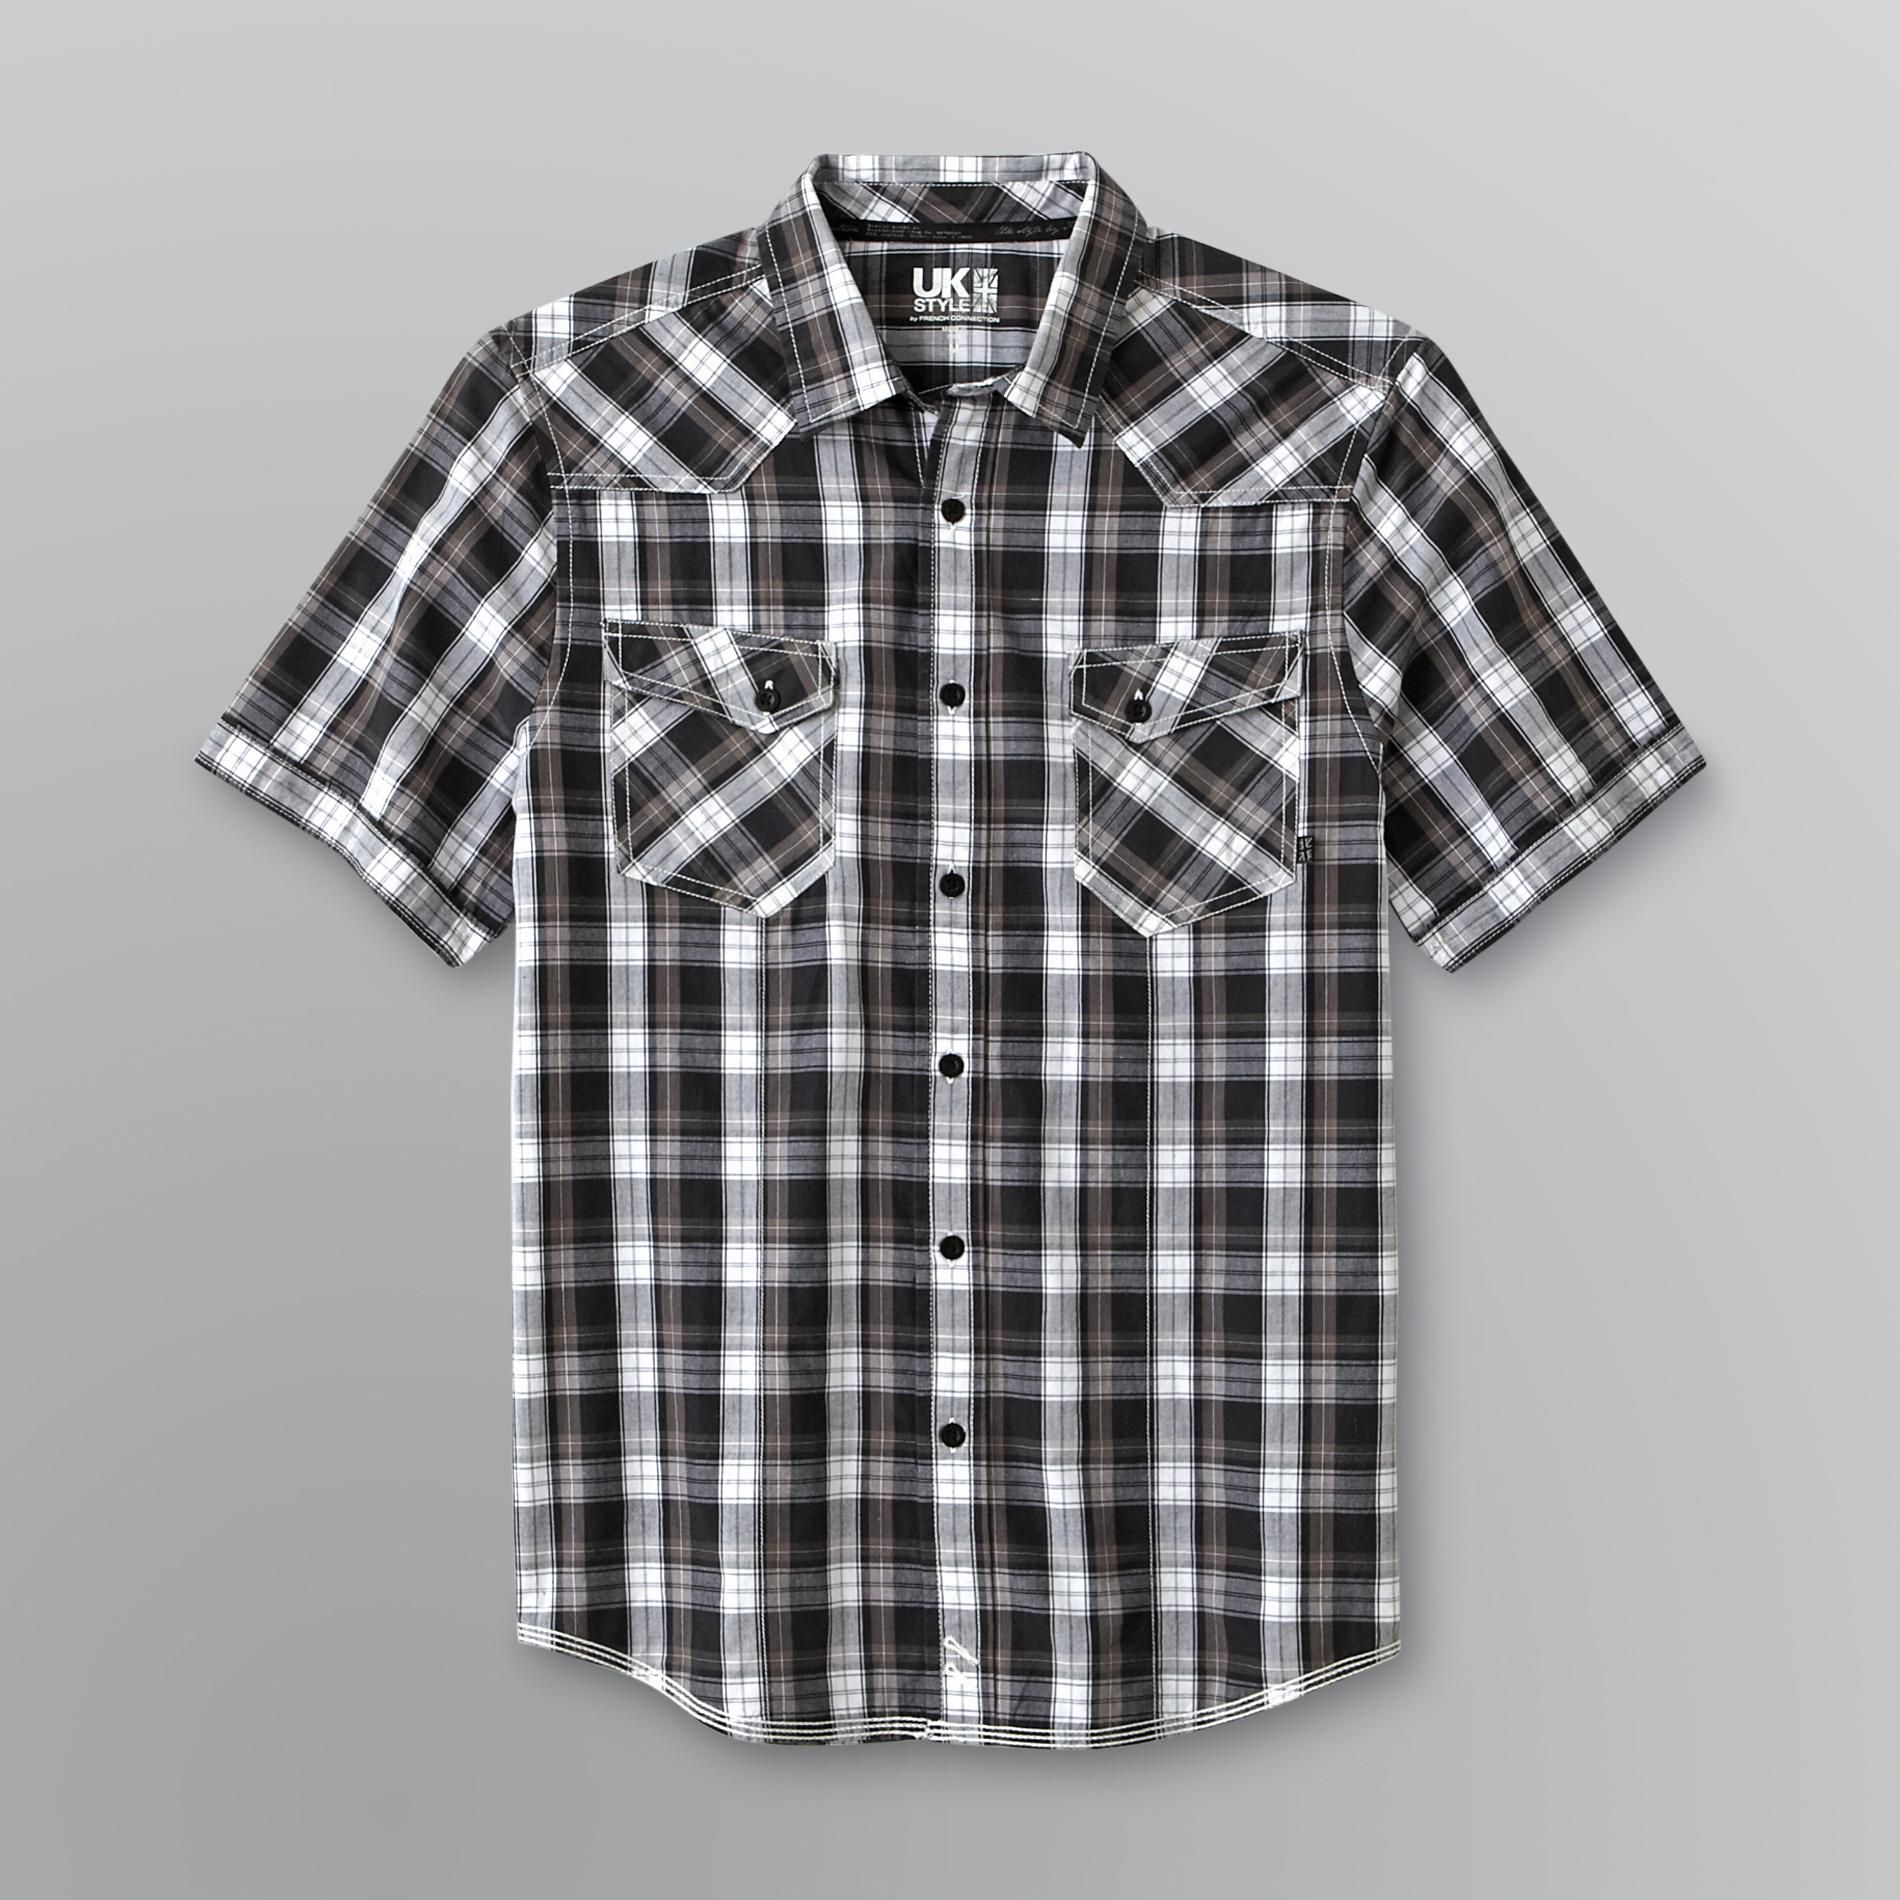 UK Style by French Connection Young Men's Sport Shirt - Plaid